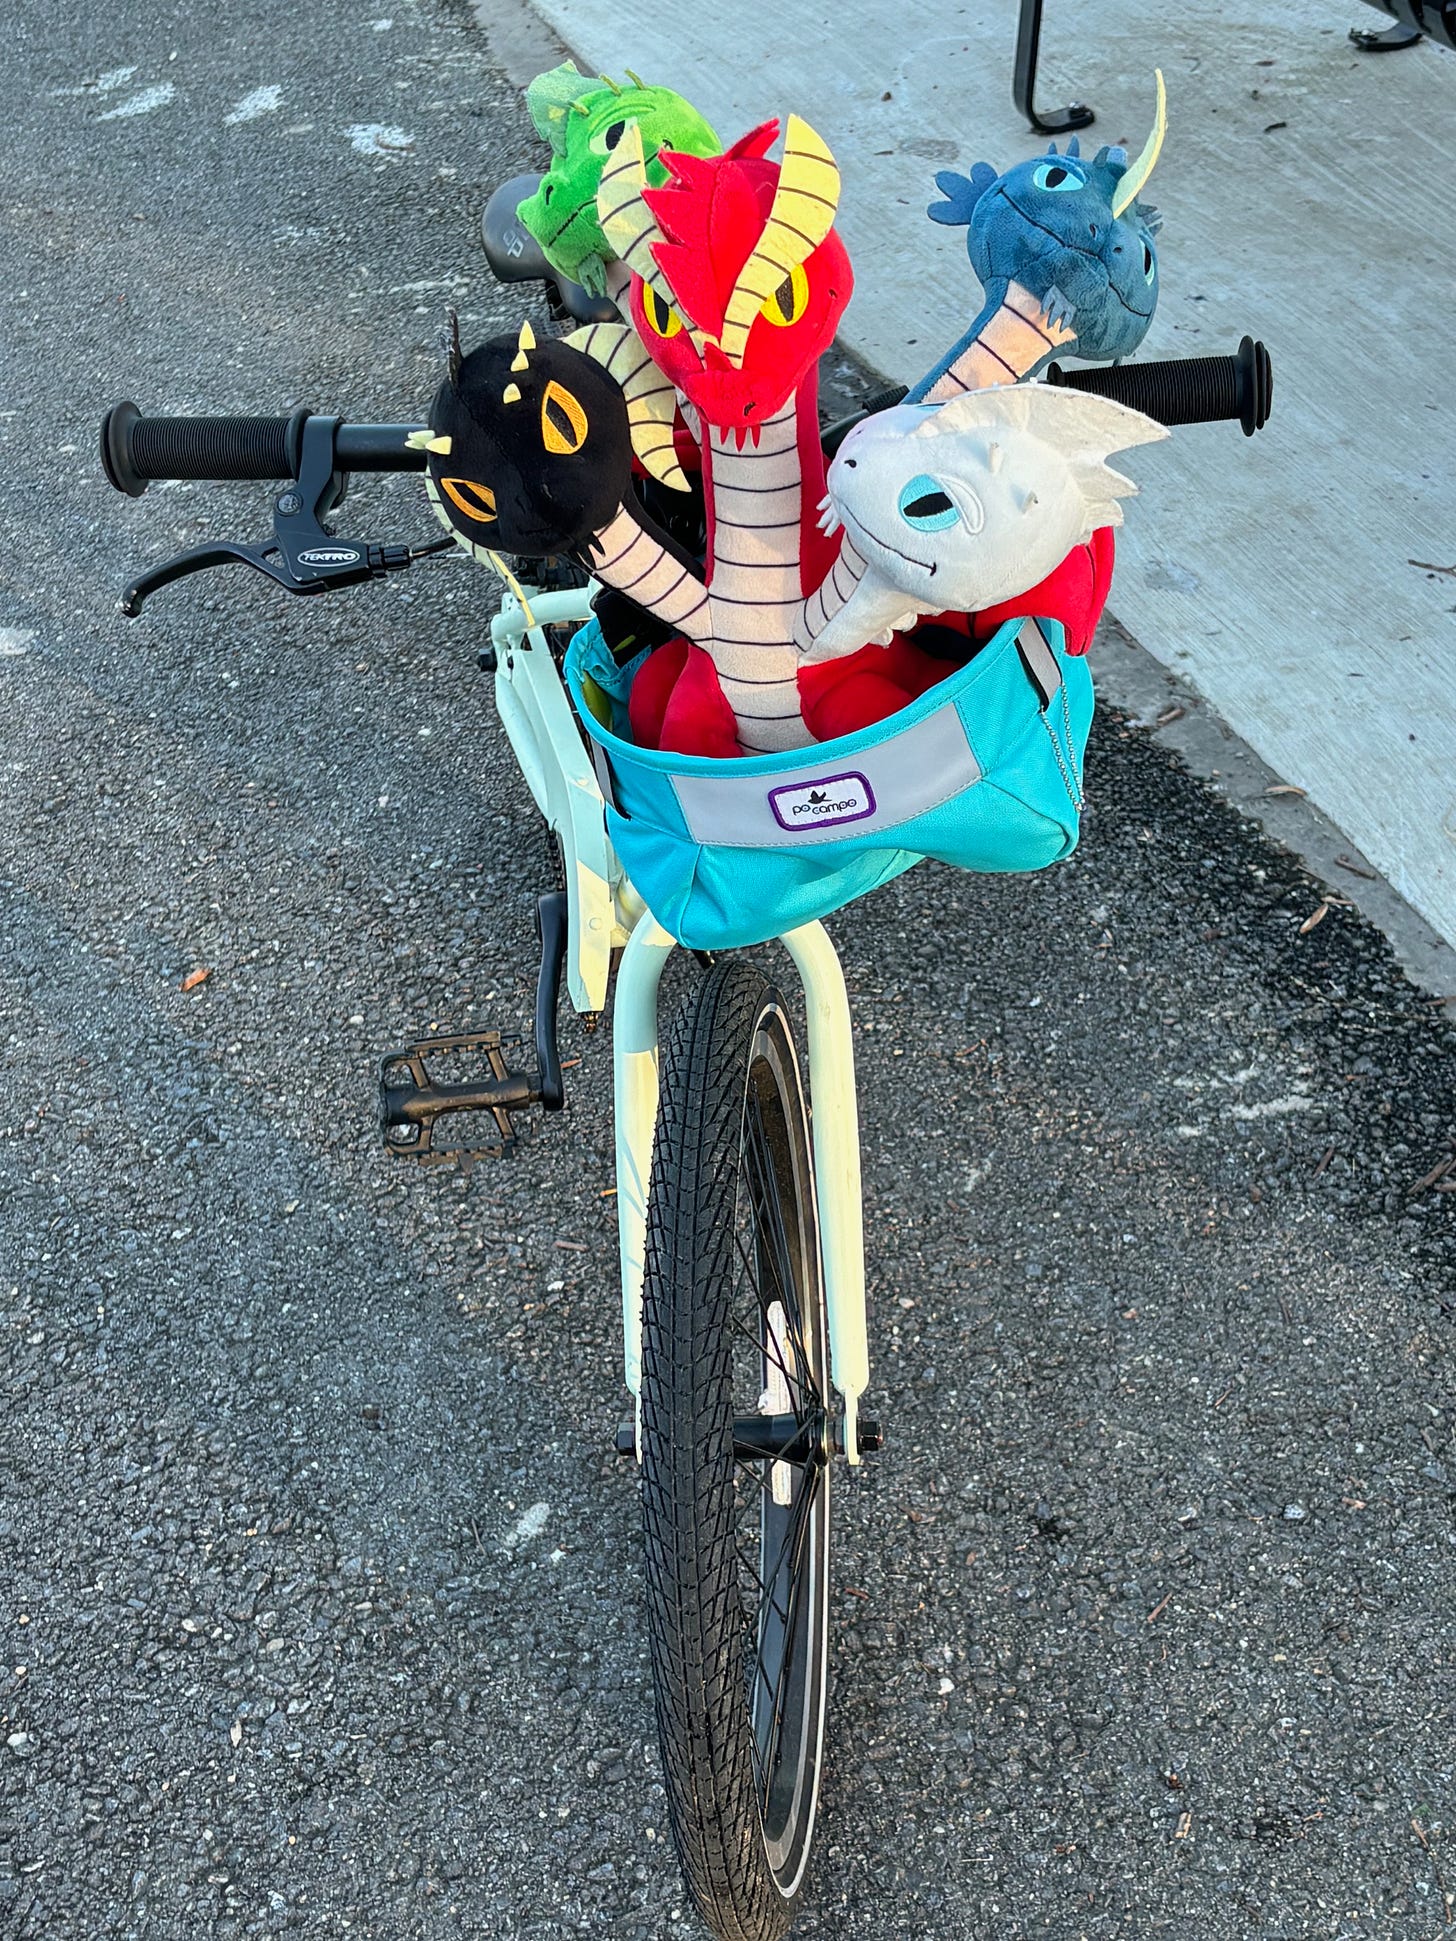 A children's bike with a five-headed dragon in a bike bag on the front